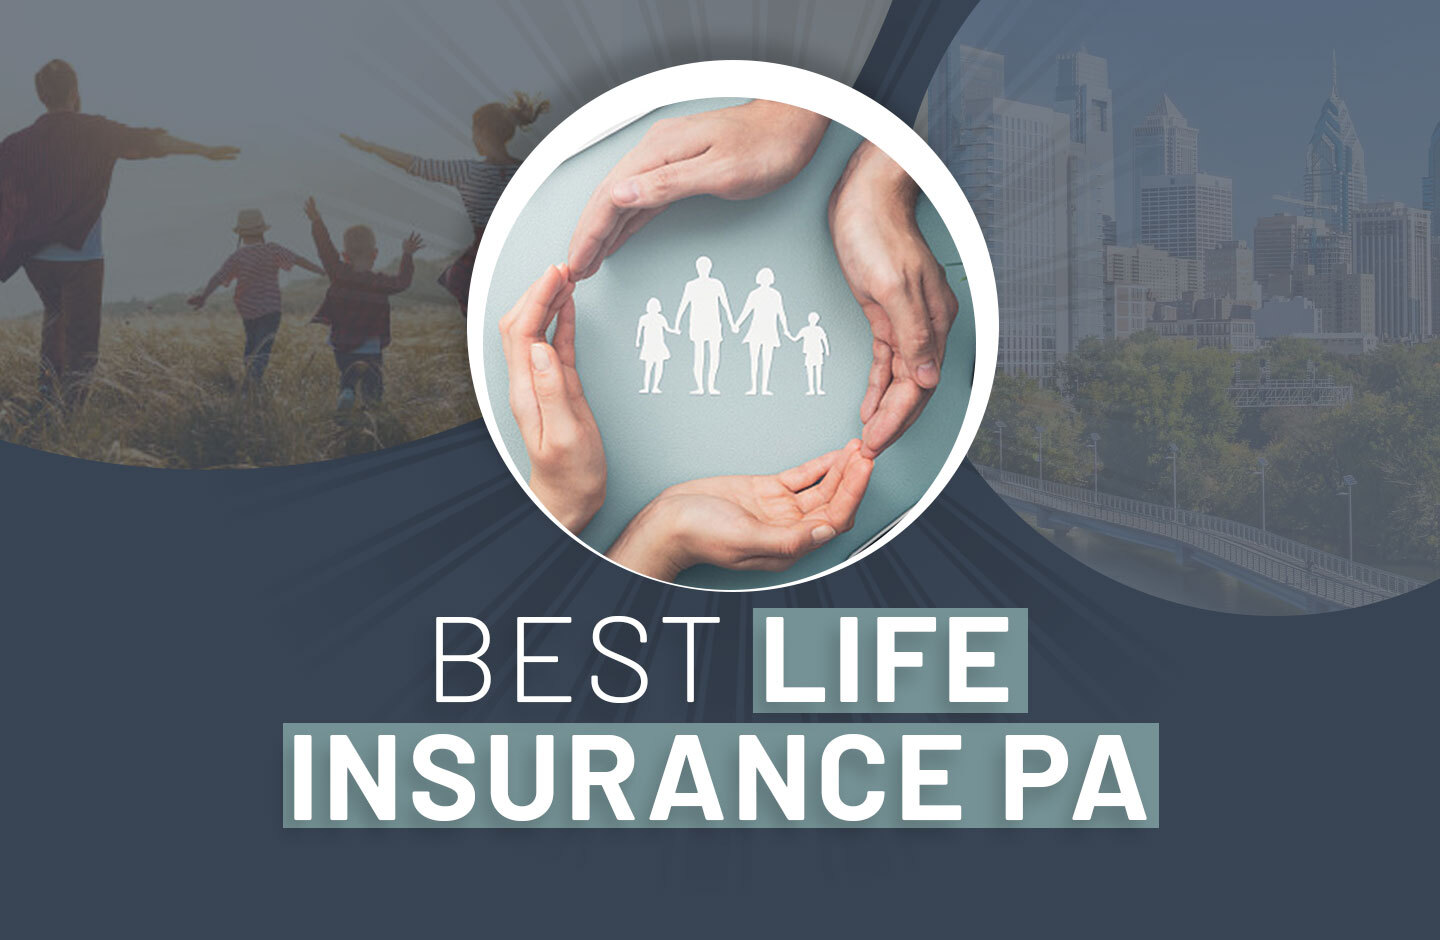 The 5 Best Life Insurance Companies in Pennsylvania 2022: Reviews and Ratings